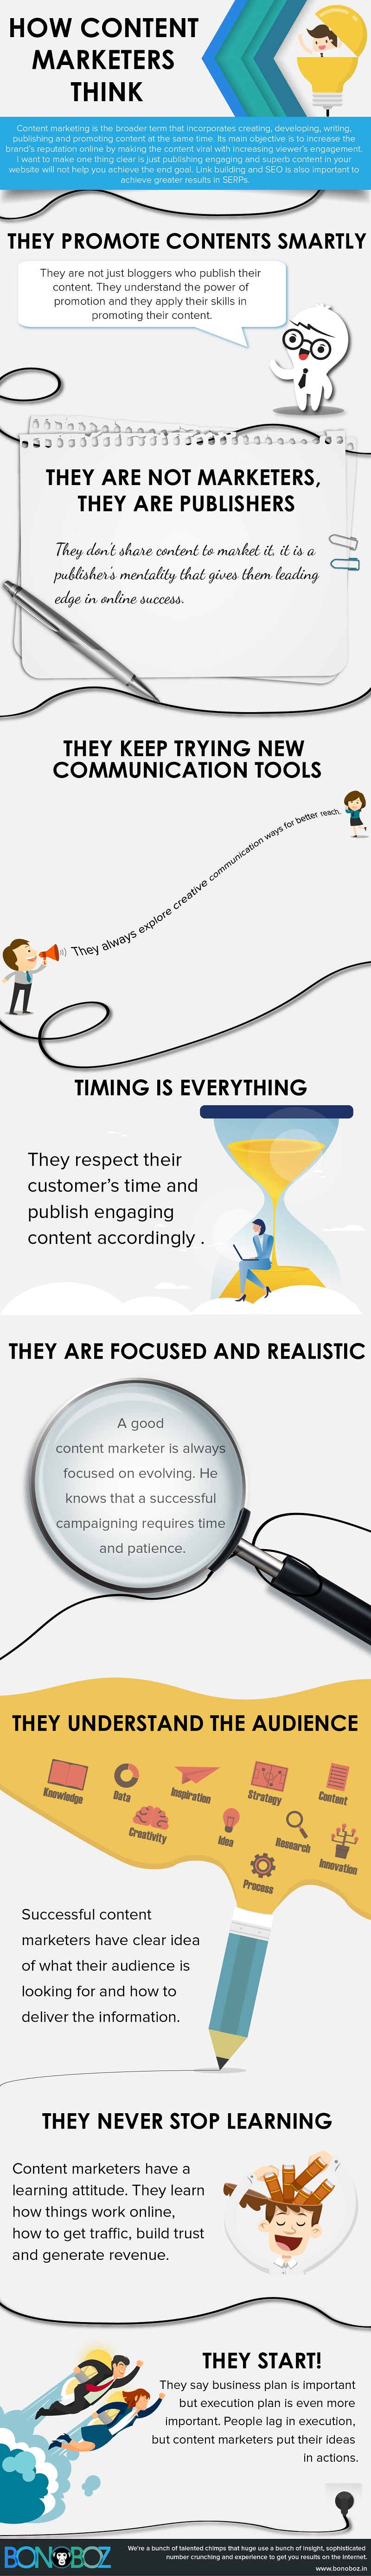 how content marketers think